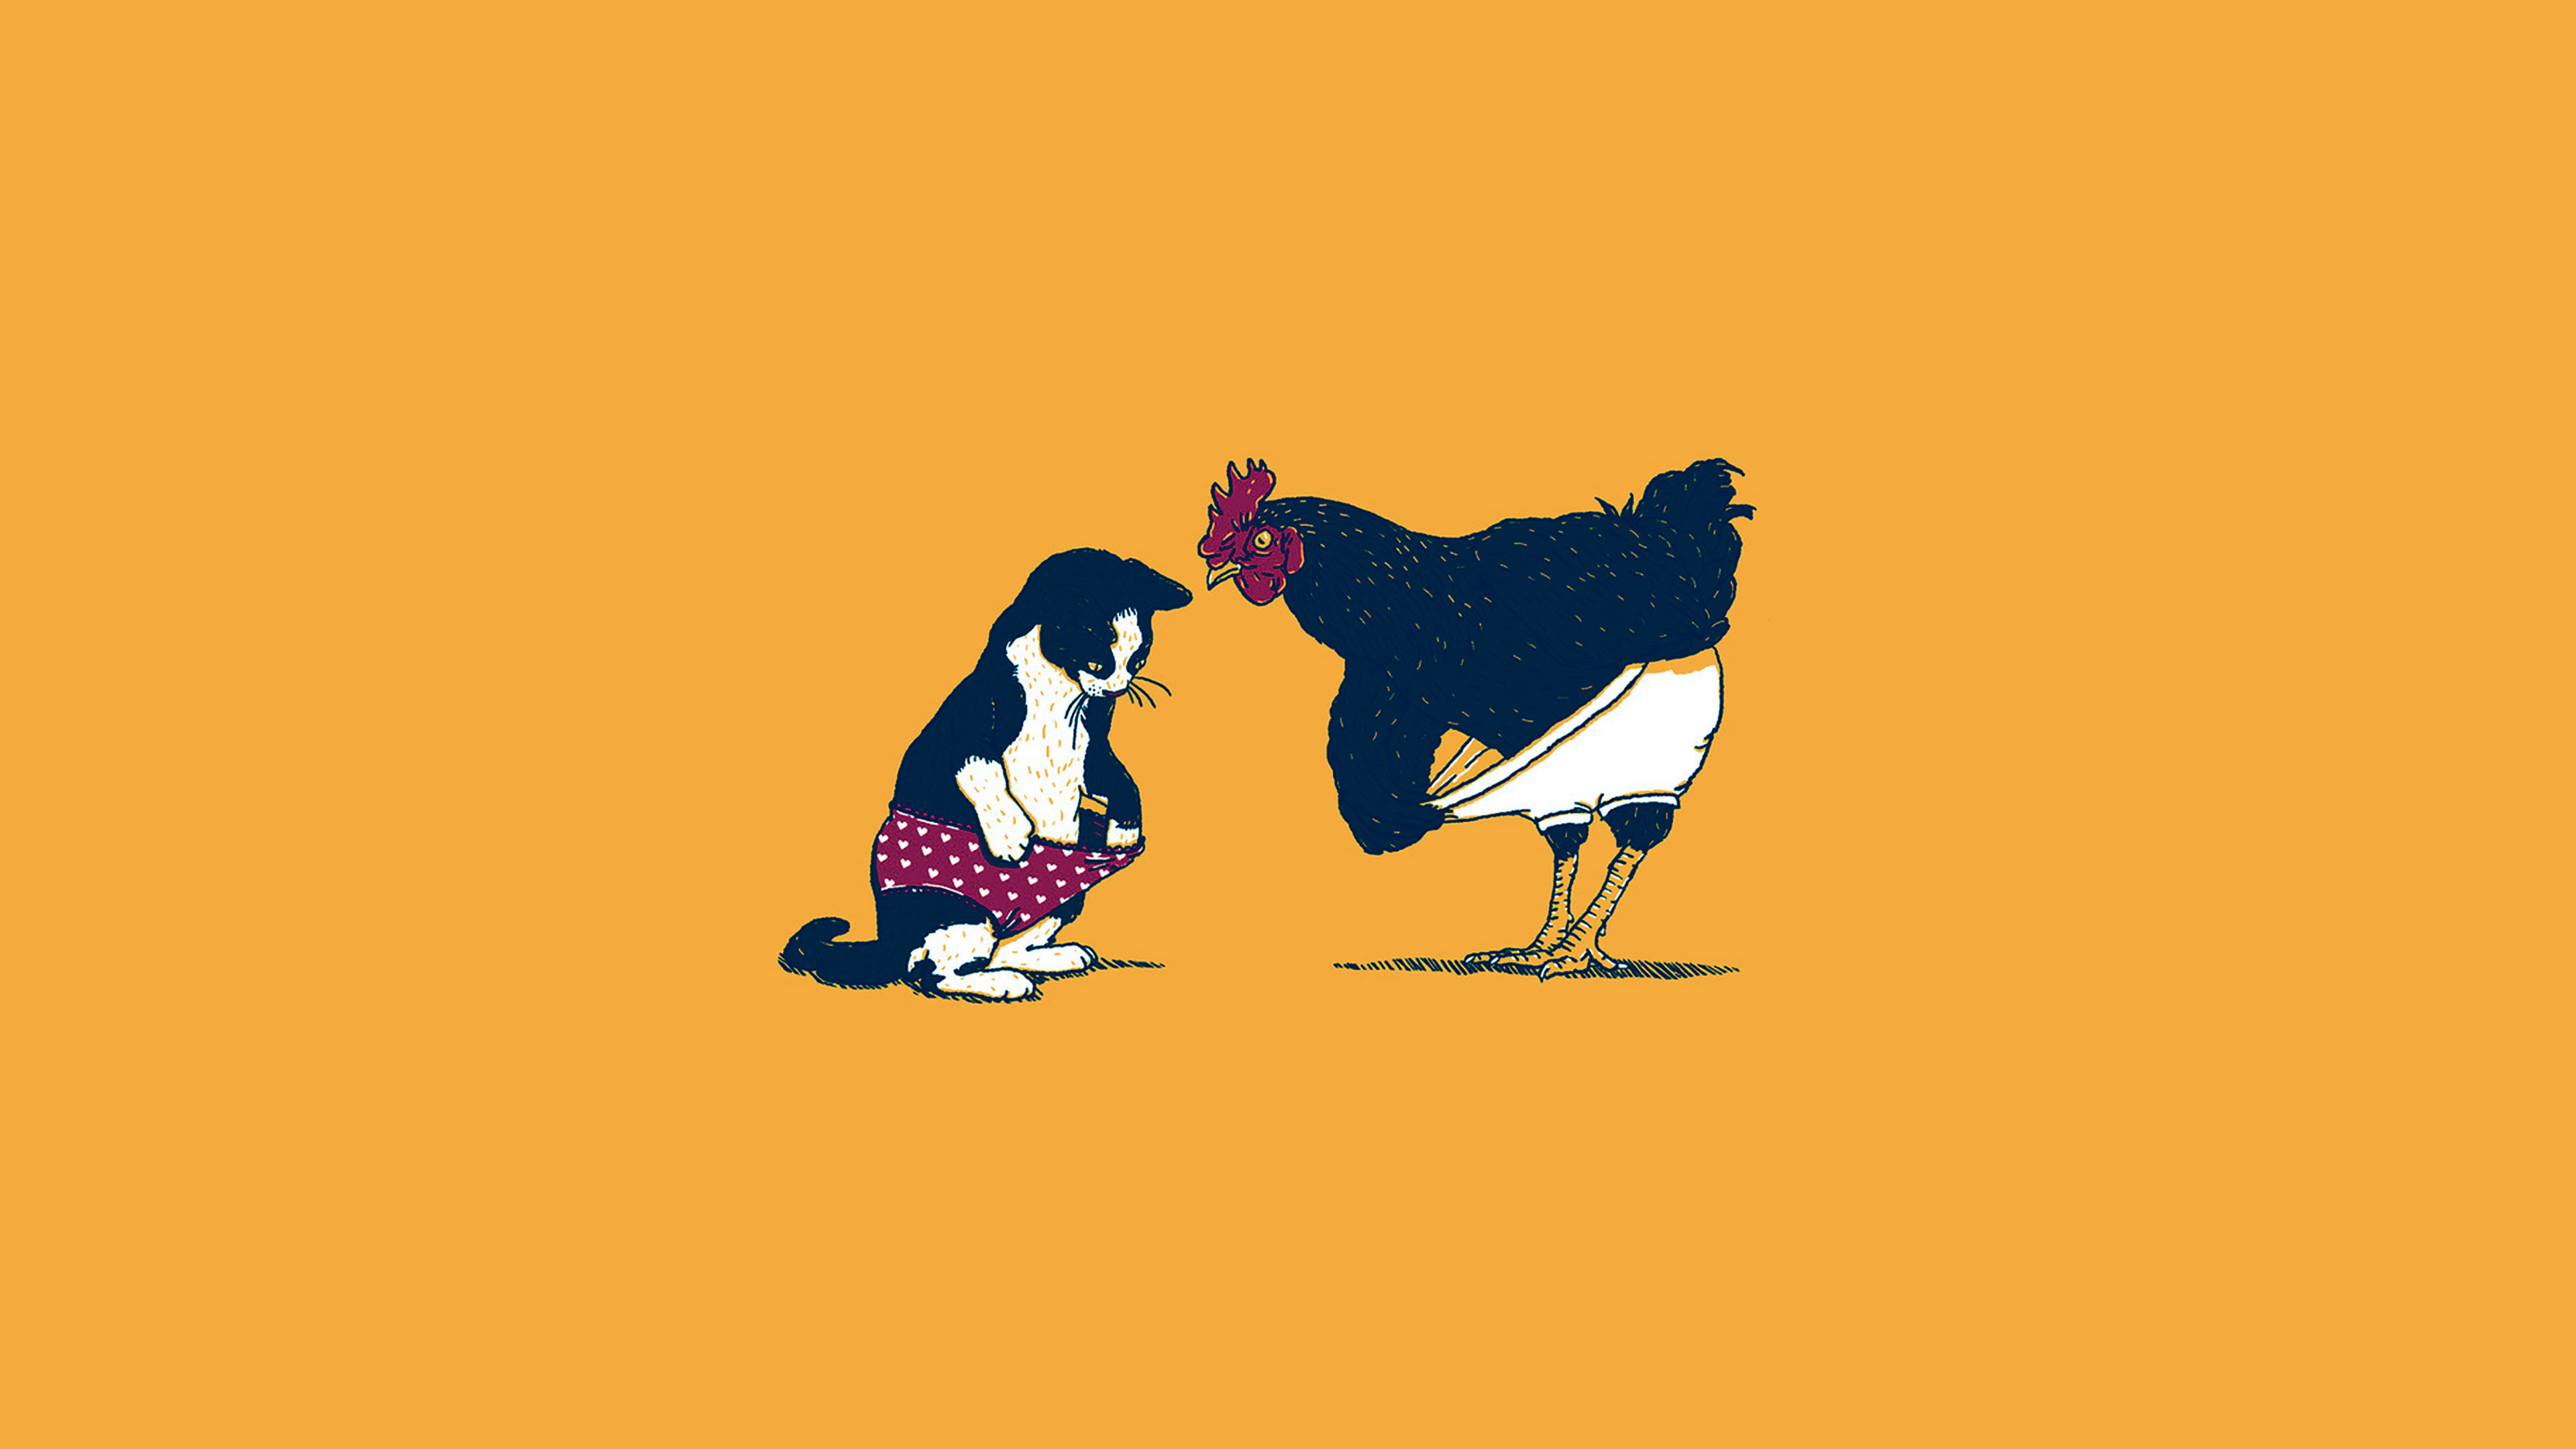 Cat and chicken, Playful illustration, Quirky art, Whimsical wallpaper, 3840x2160 4K Desktop